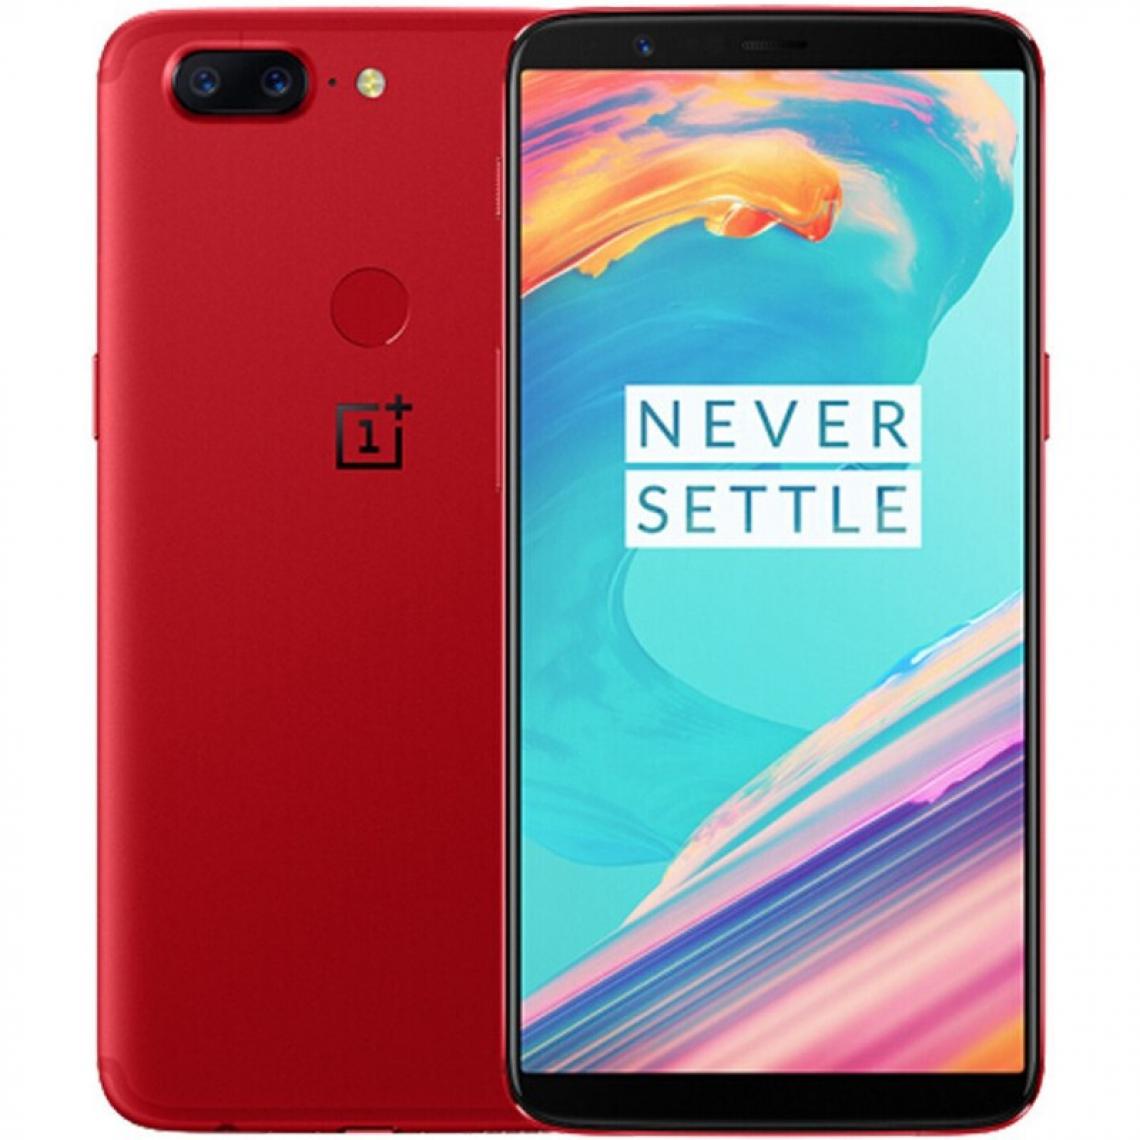 Oneplus - OnePlus 5T - Smartphone Android